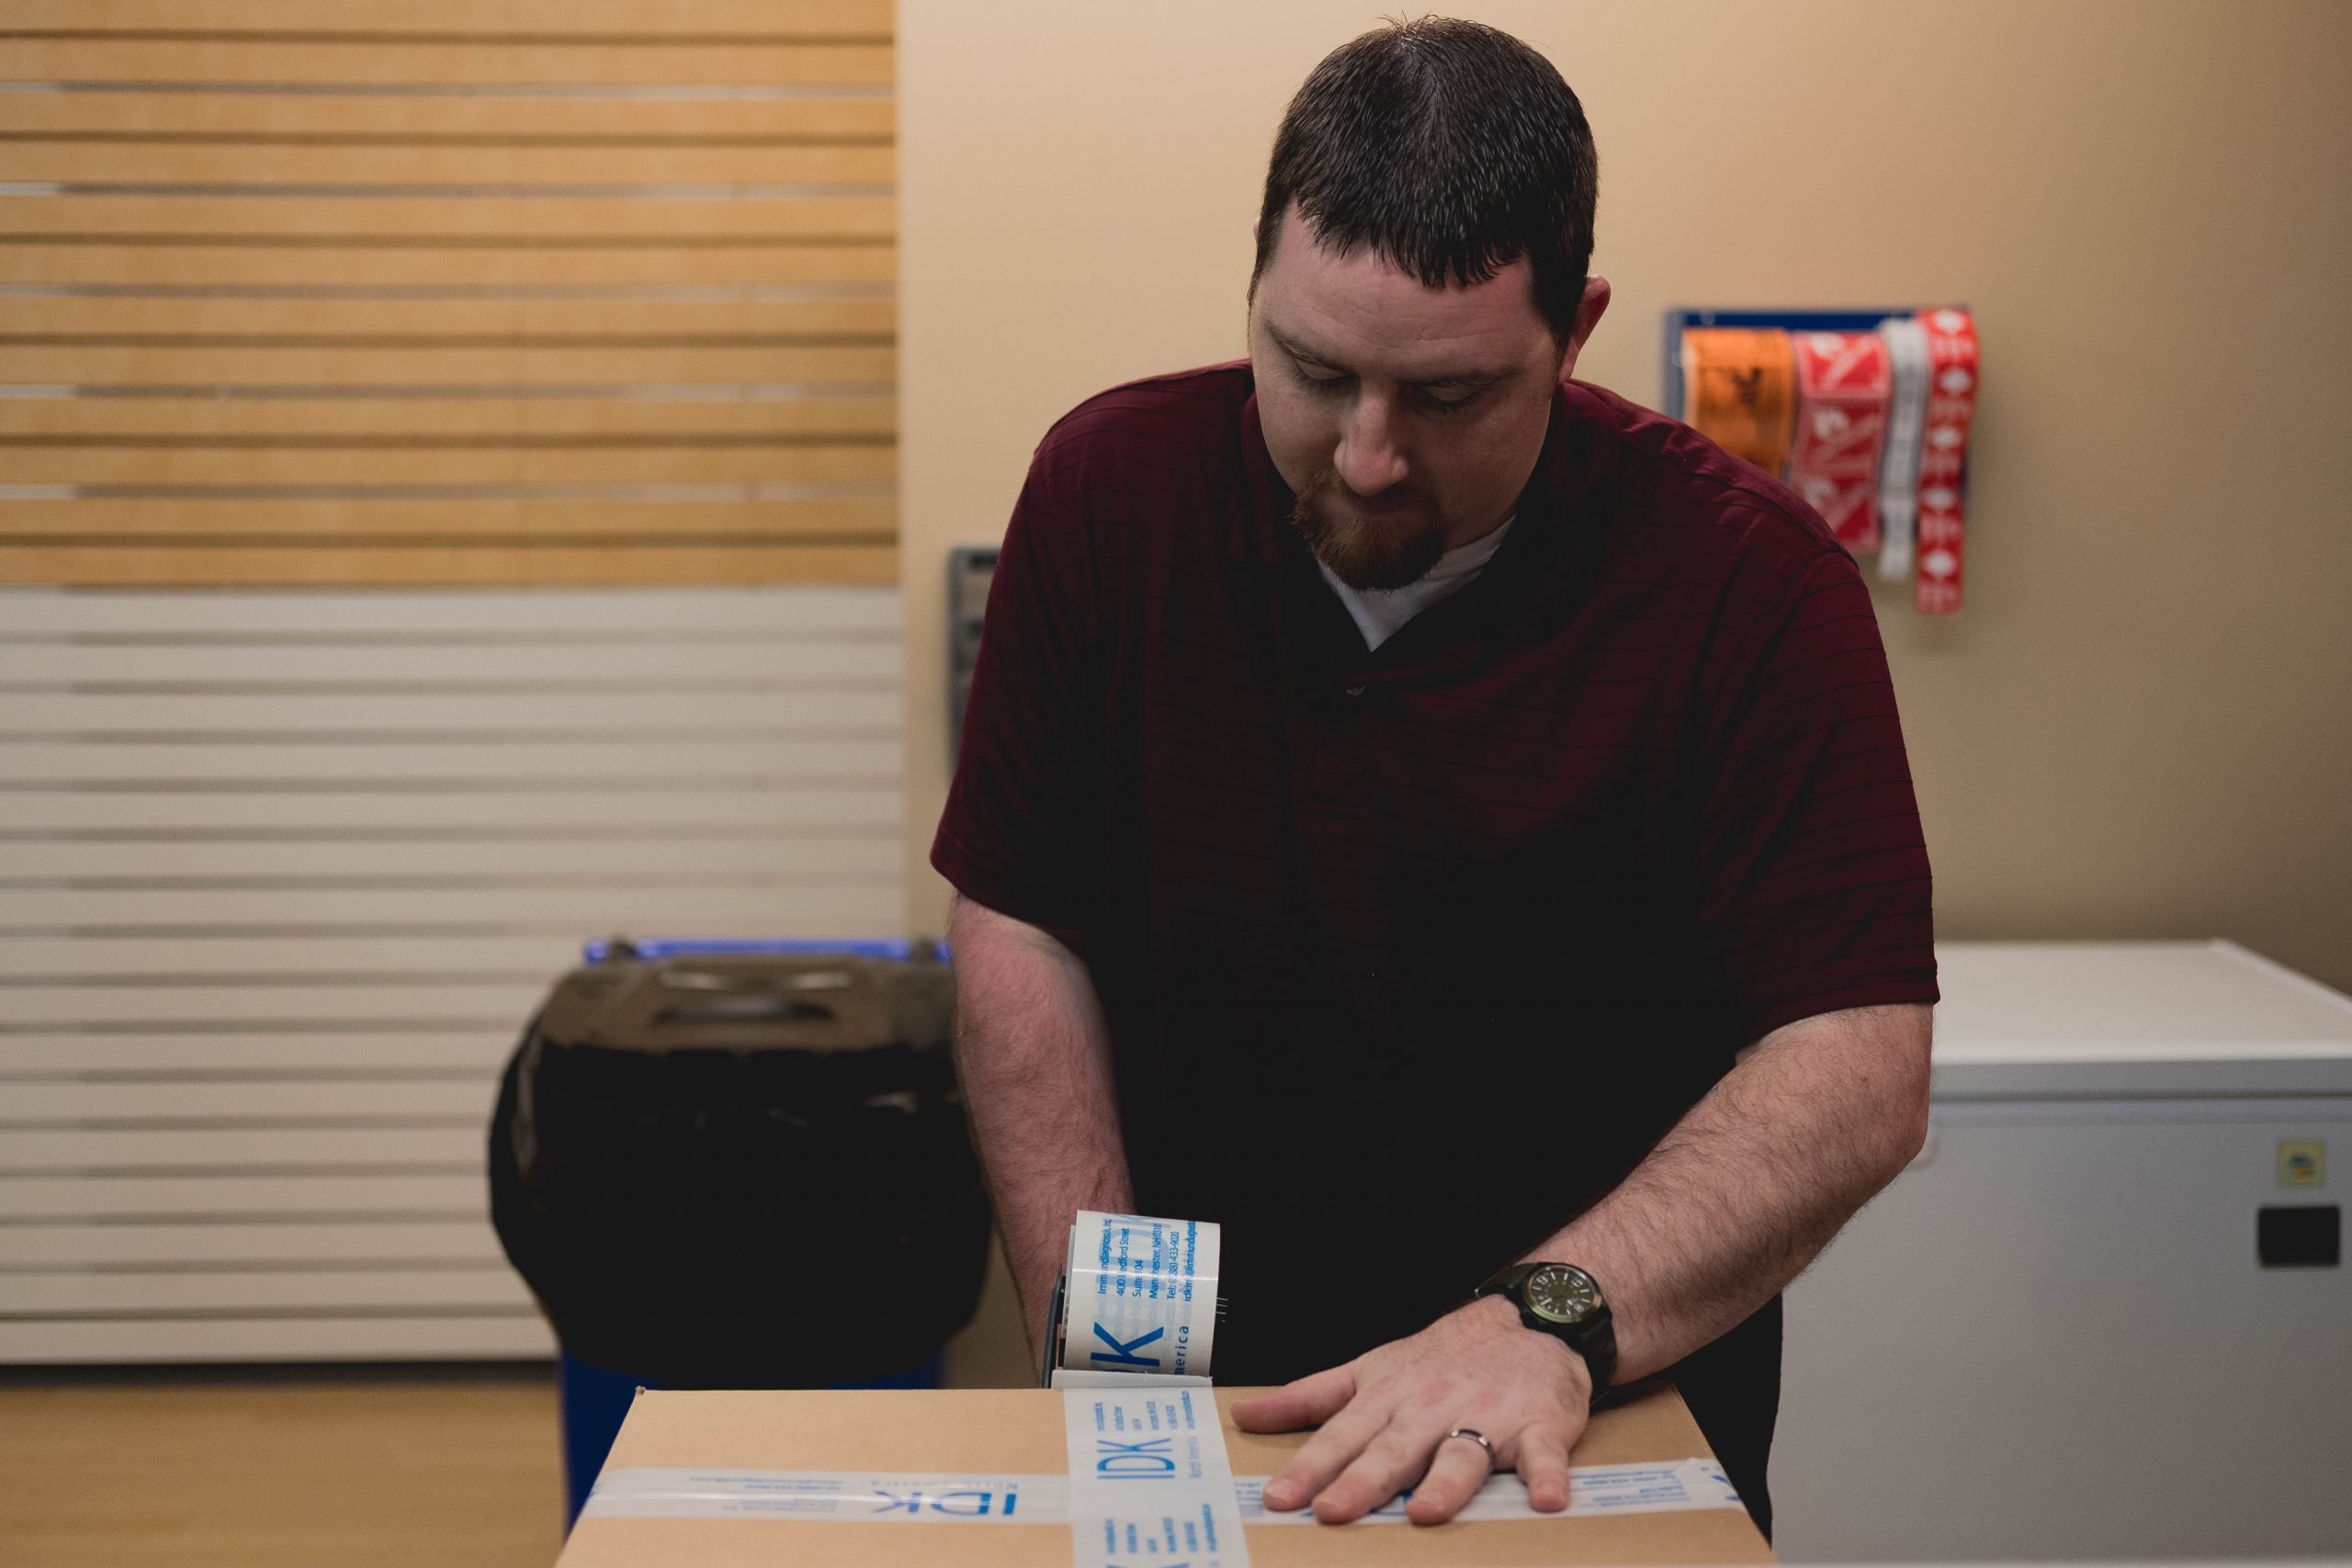 IDK Inc's Logistics Manager Matt Romano taping up a box to be shipped out to a customer.